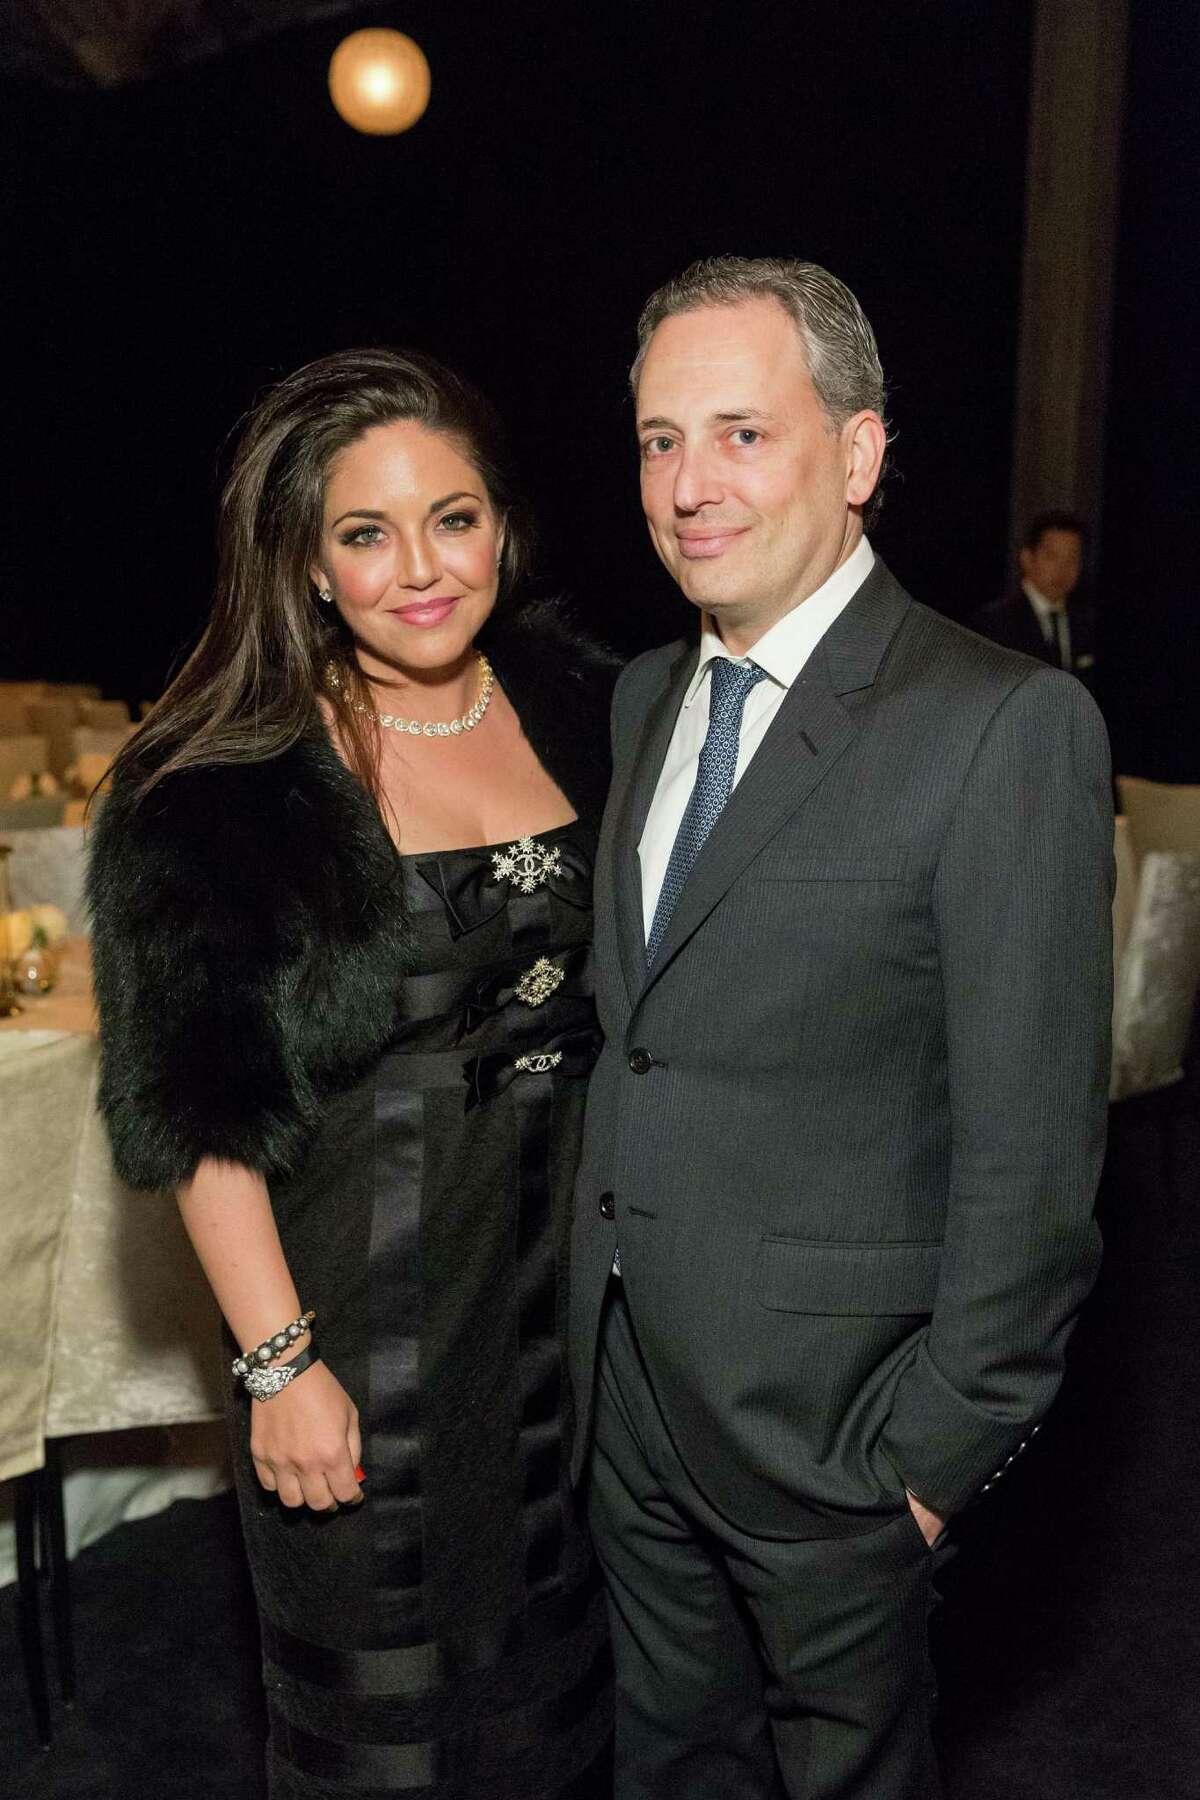 The CPMC 2020 Gala sponsored by CHANEL was held at Pier 35 on February 24. It raised $2.5 million for Sutter Health's CPMC and Clinical trials for food allergies at CPMC. Shown are Jacqueline Sacks and David Sacks. 